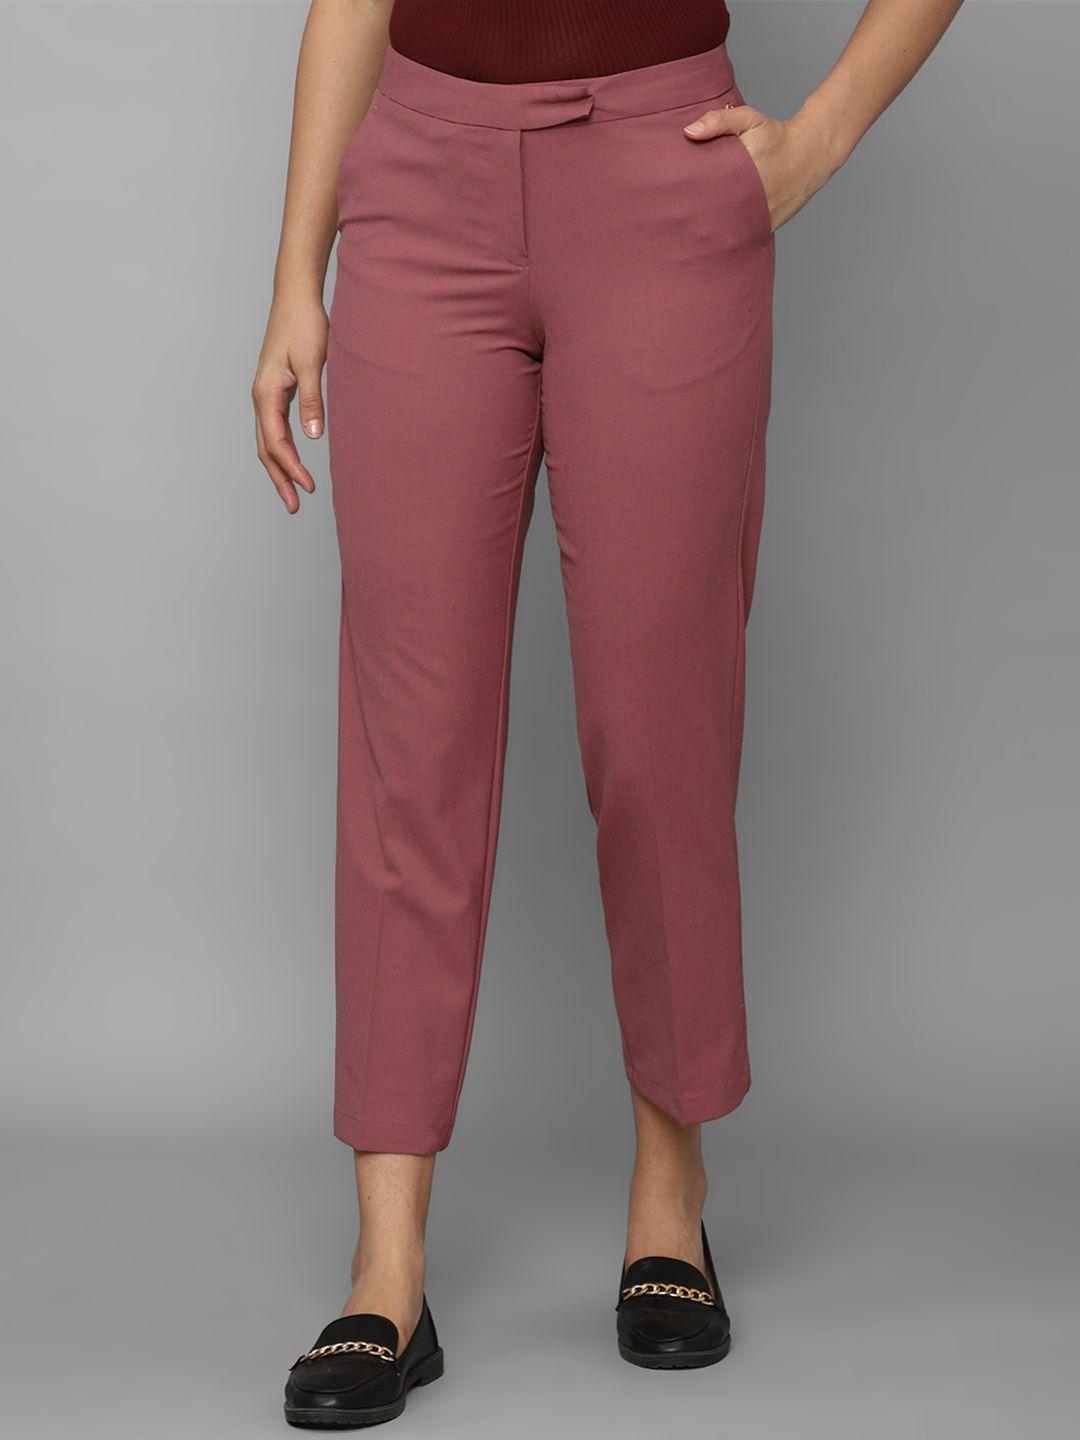 allen solly woman mid-rise regular fit trousers